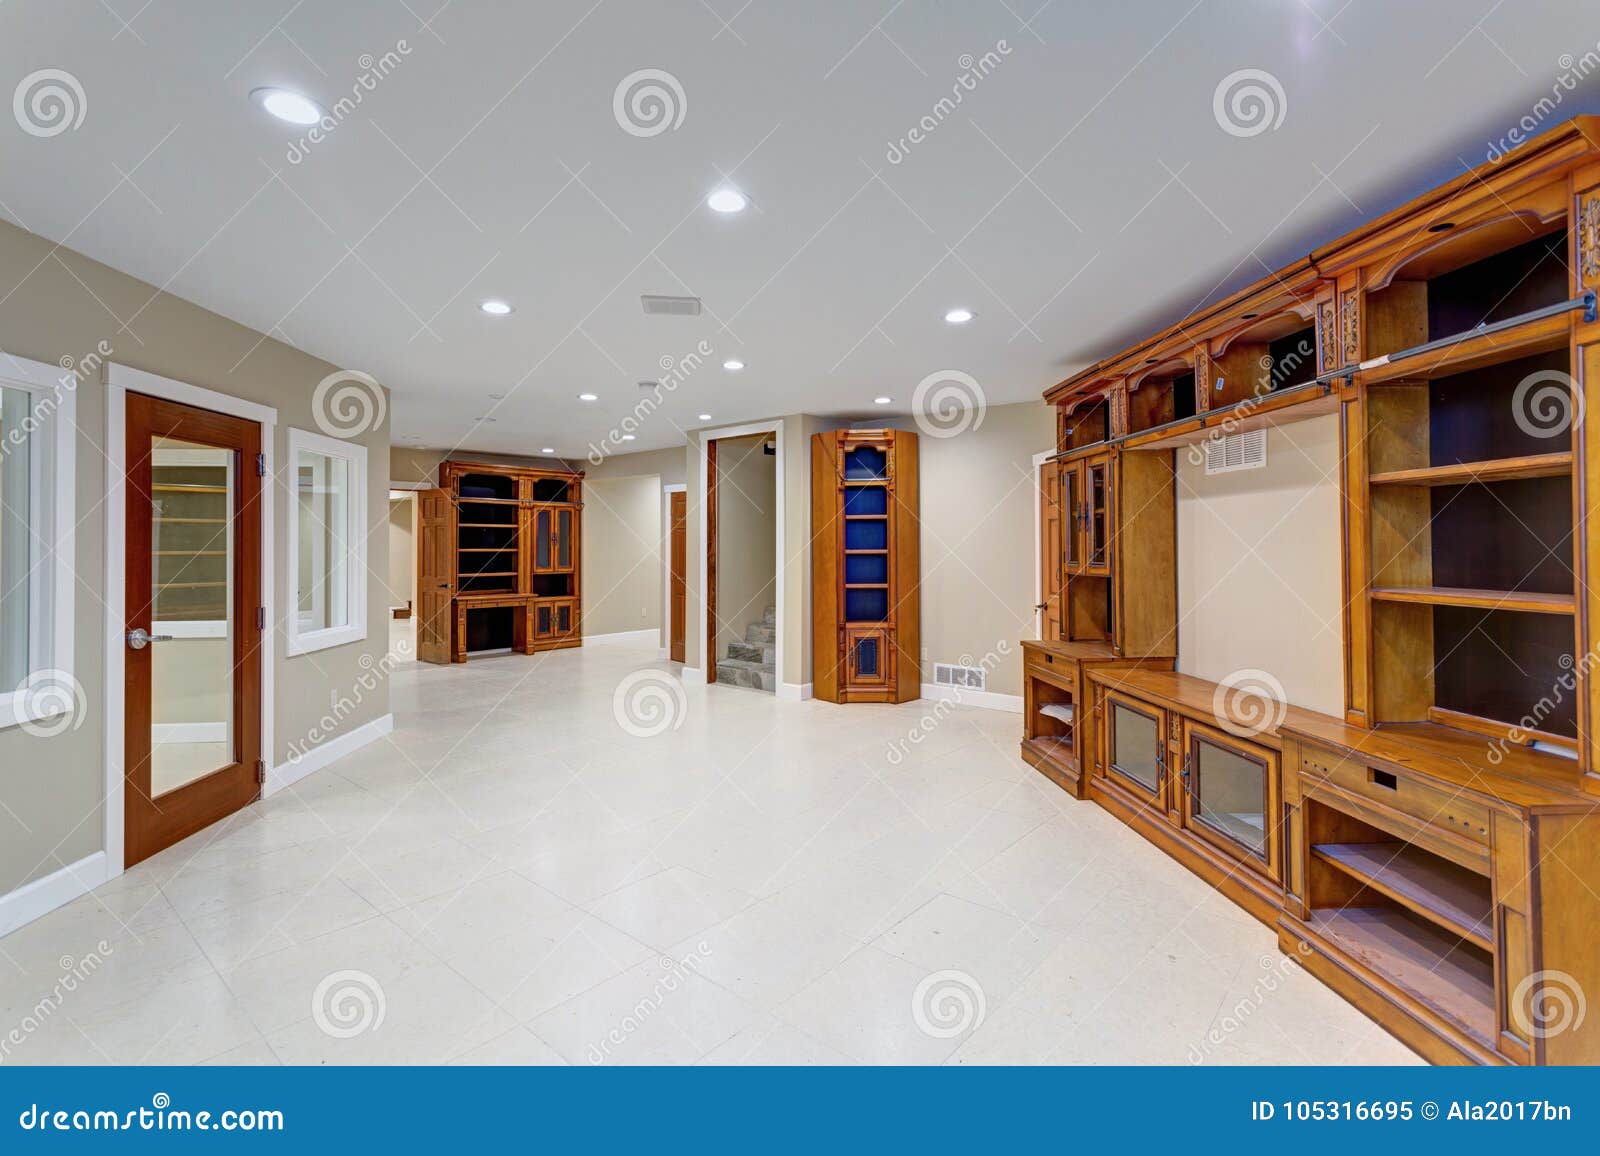 Spacious Basement Area With Large Custom Built Bookcase Stock